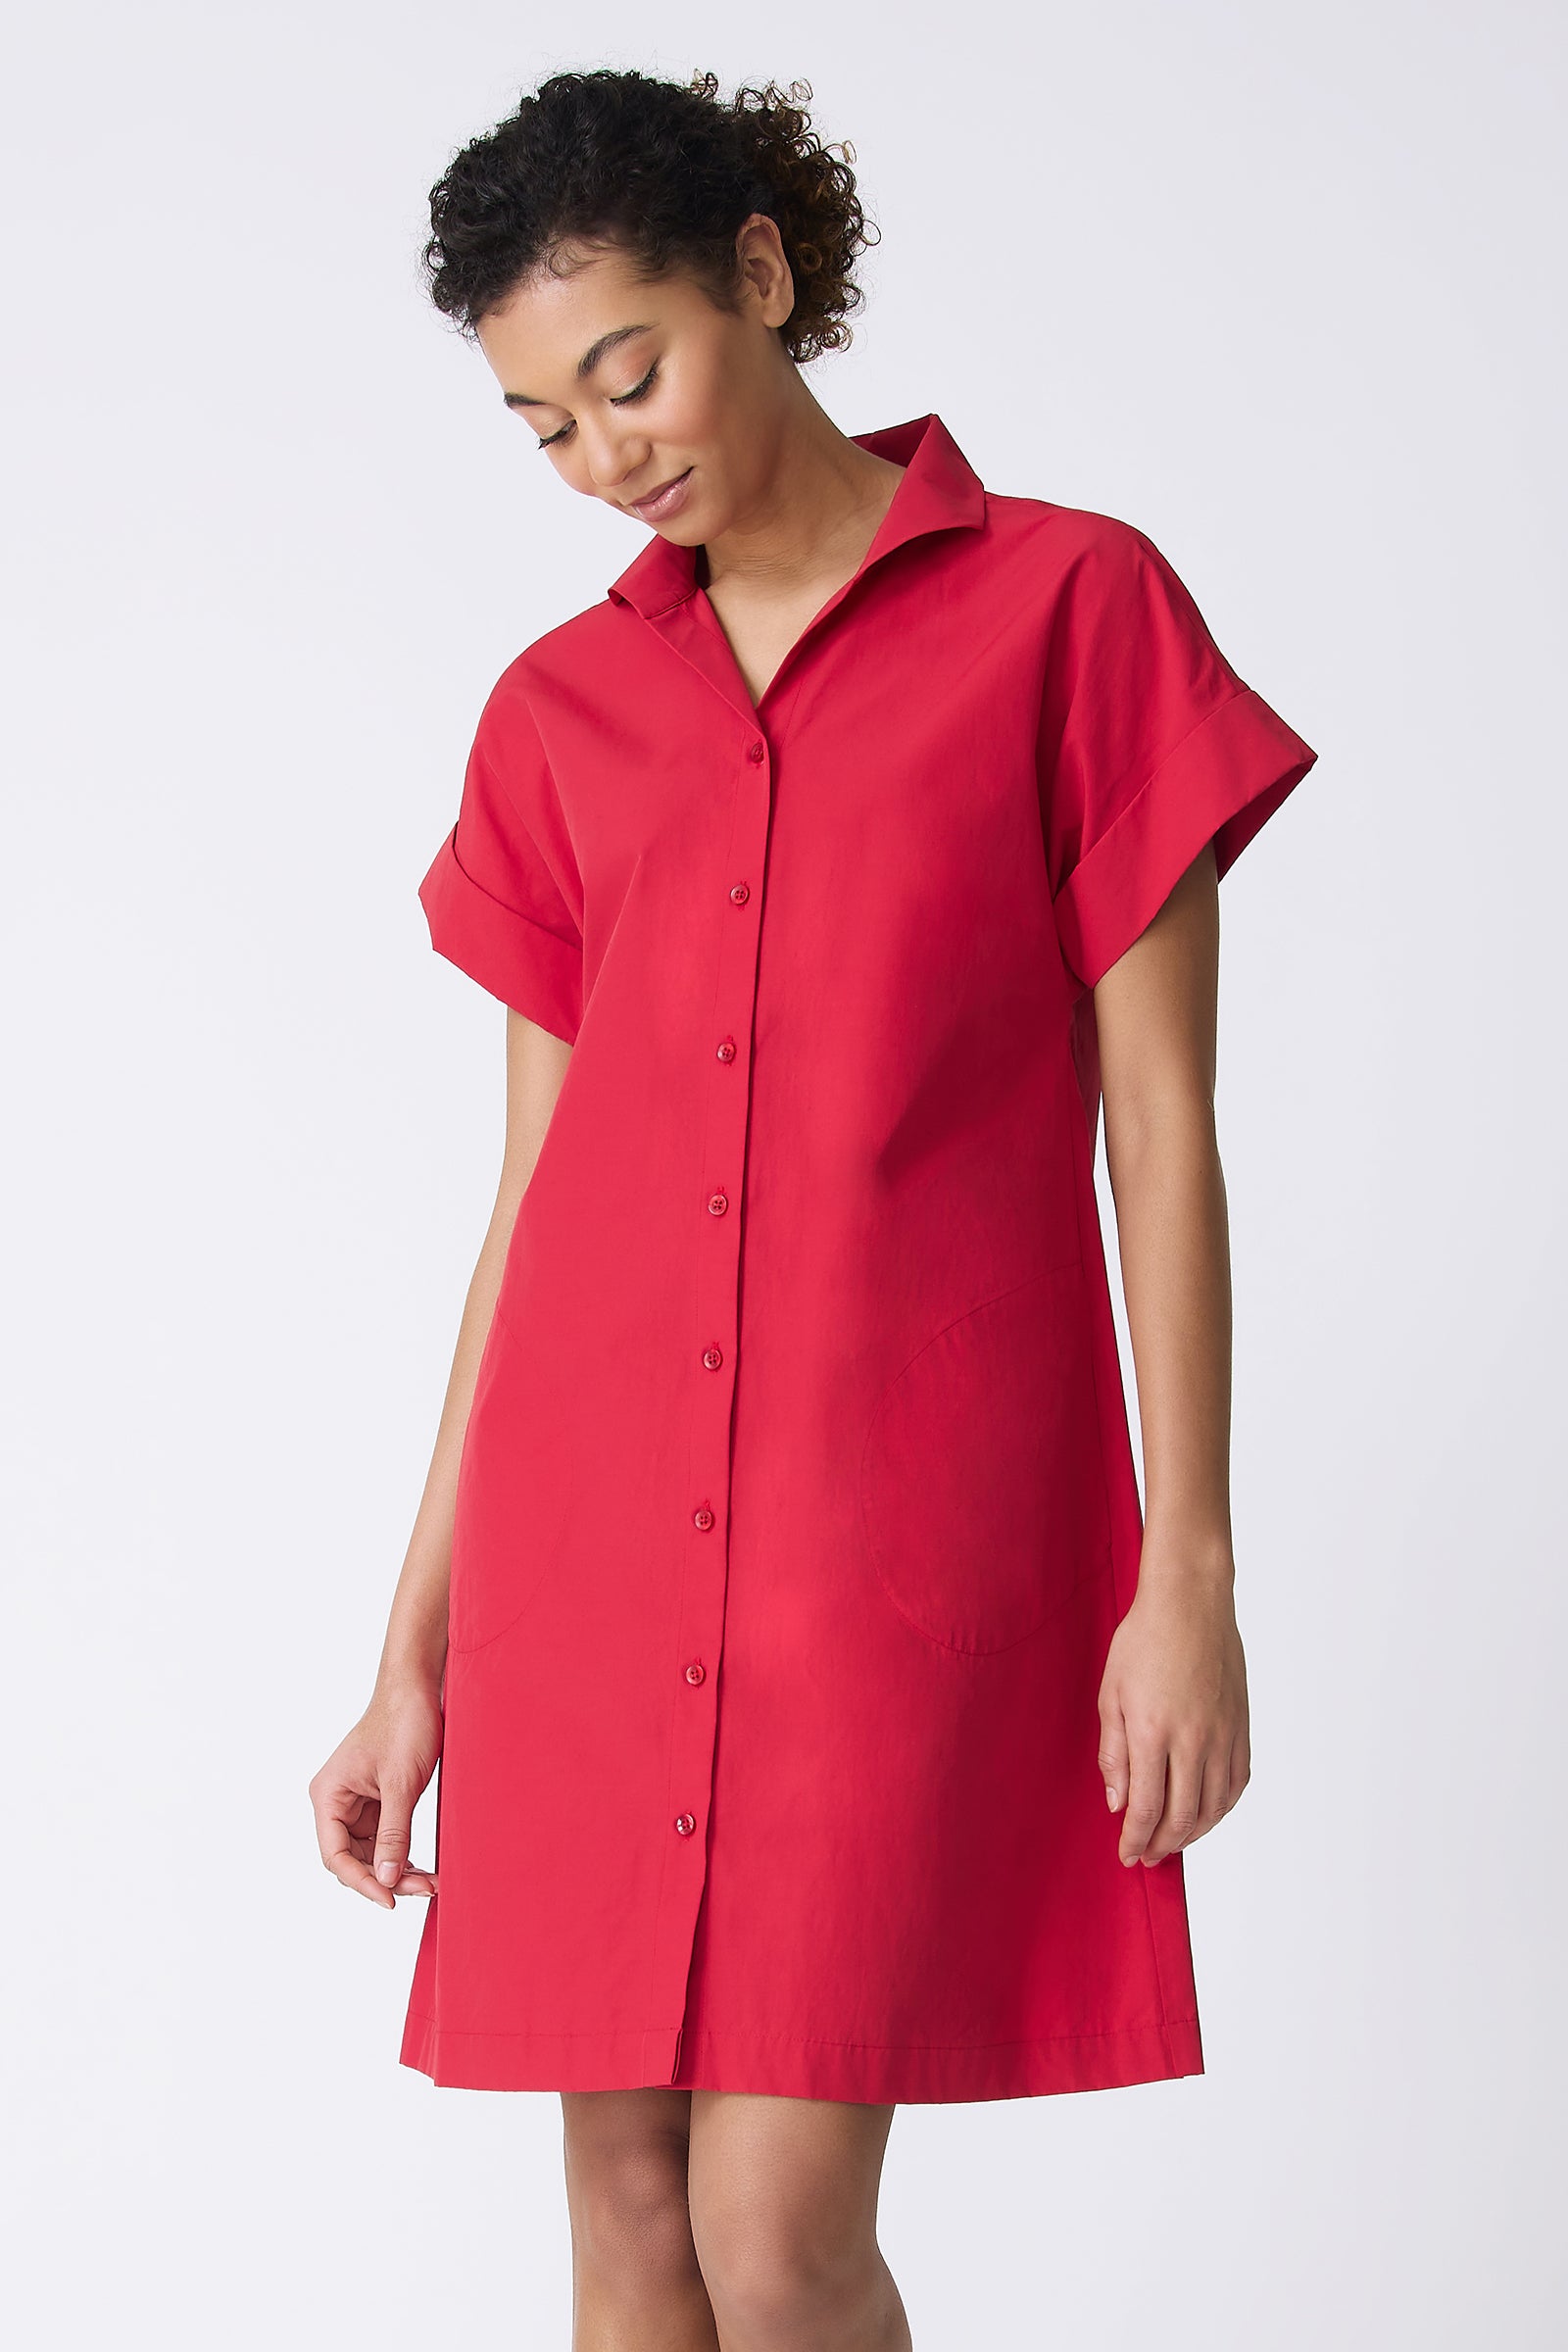 Kal Rieman Holly Kimono Dress in Red on model looking down front view